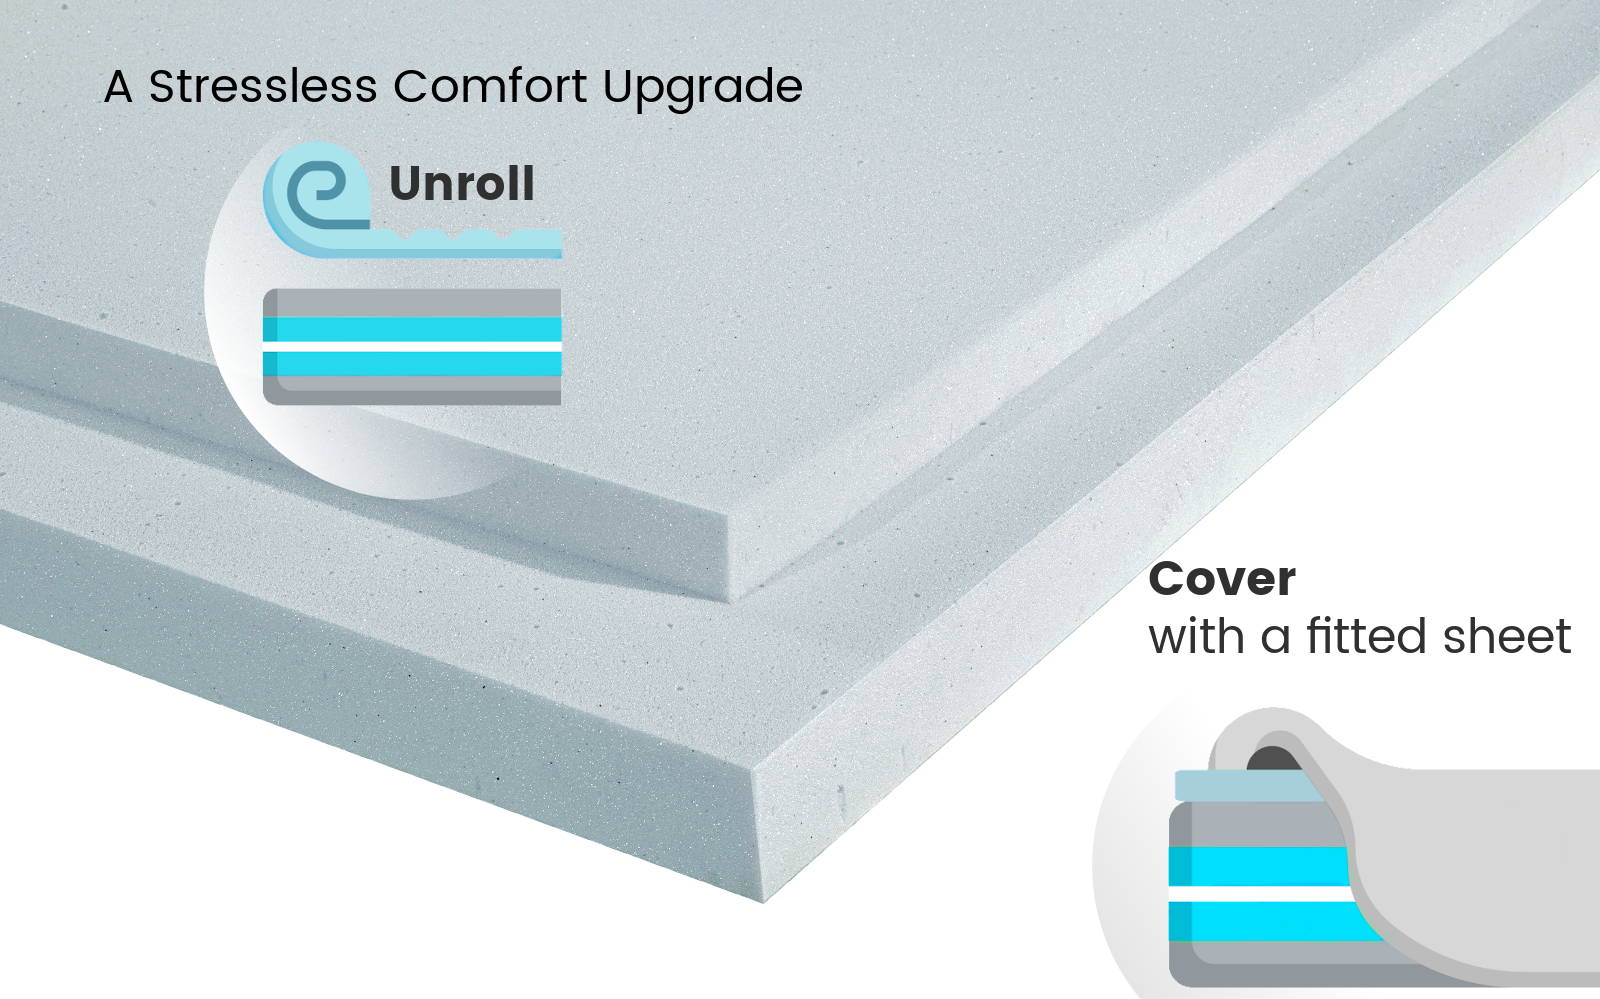 A calming and stressless comfort upgrade: Just unroll and cover with your fitted sheet.